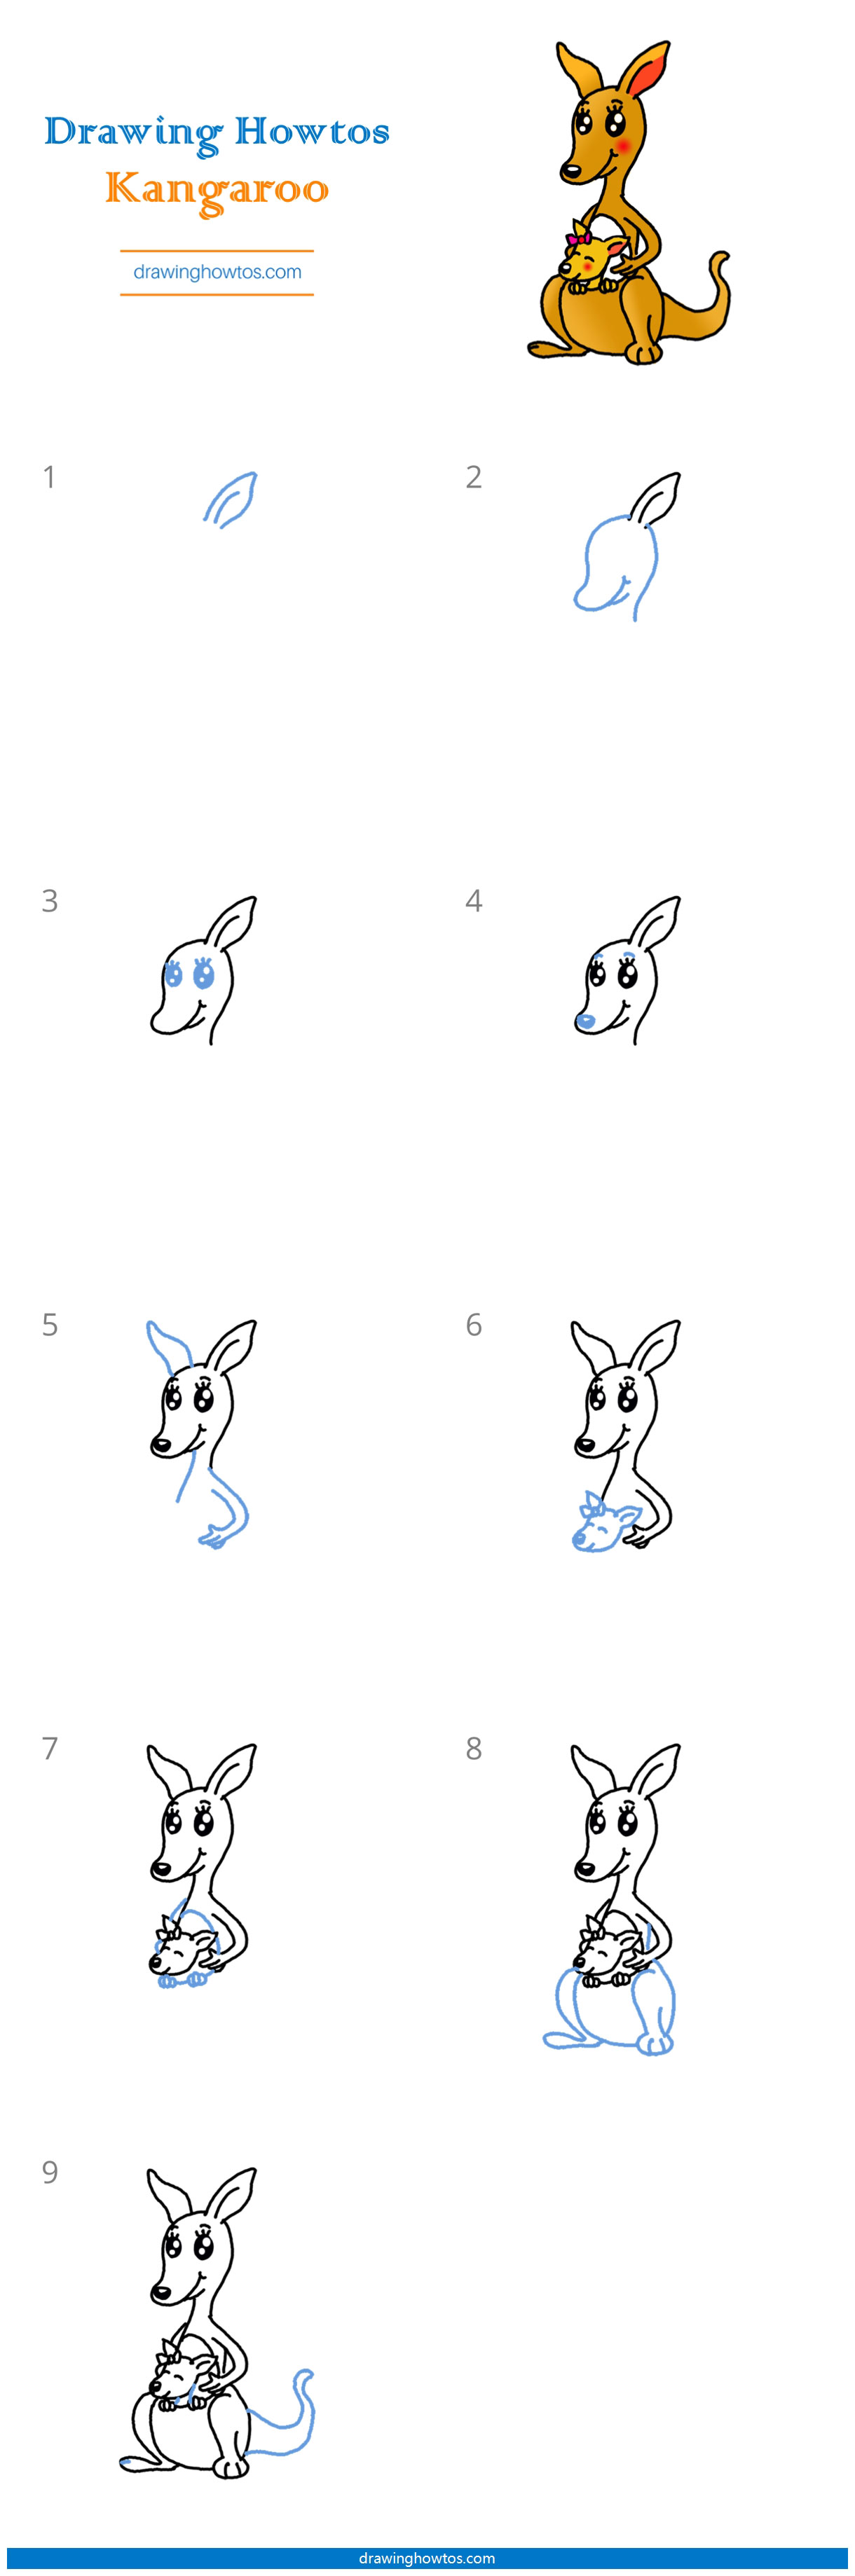 How to Draw a Kangaroo Step by Step